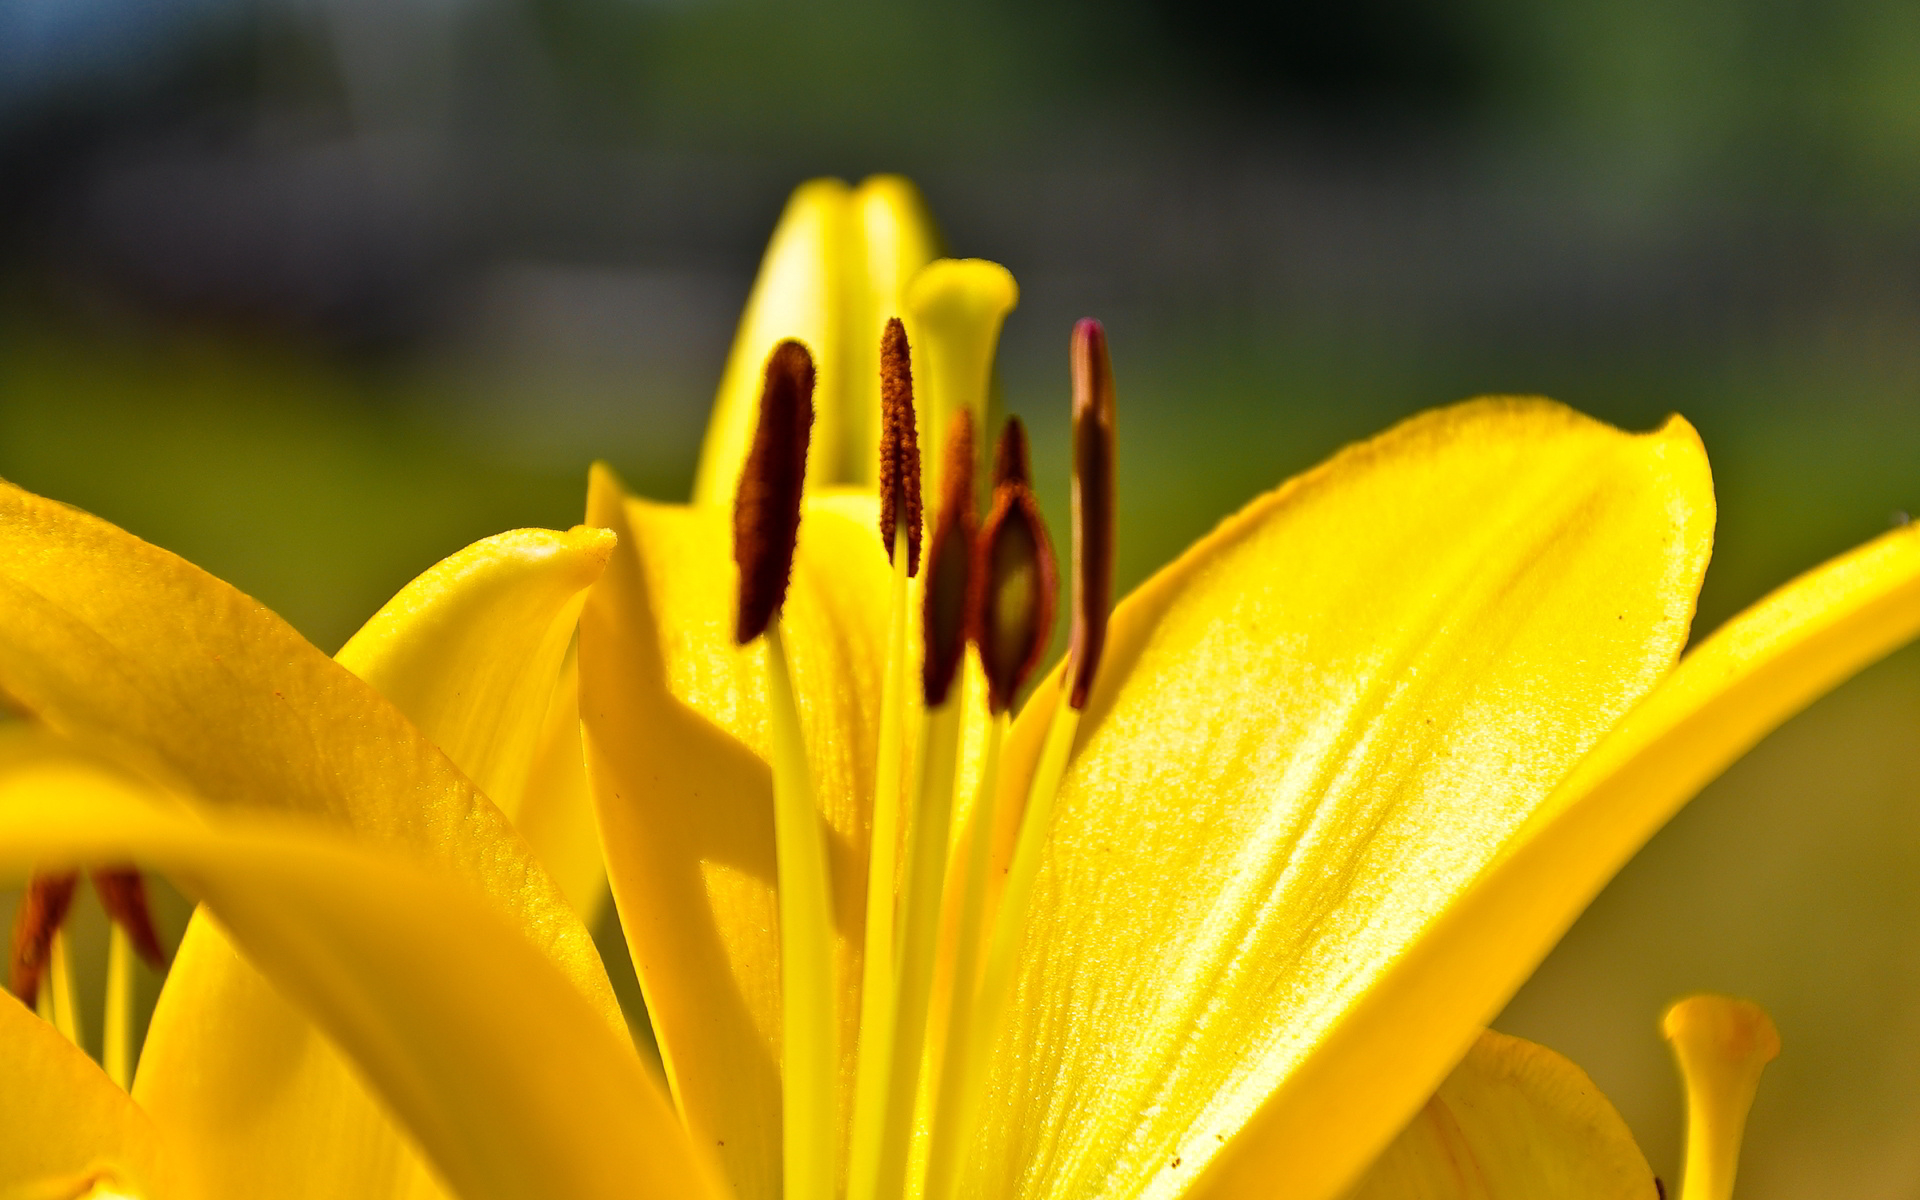 yellow lily flowers